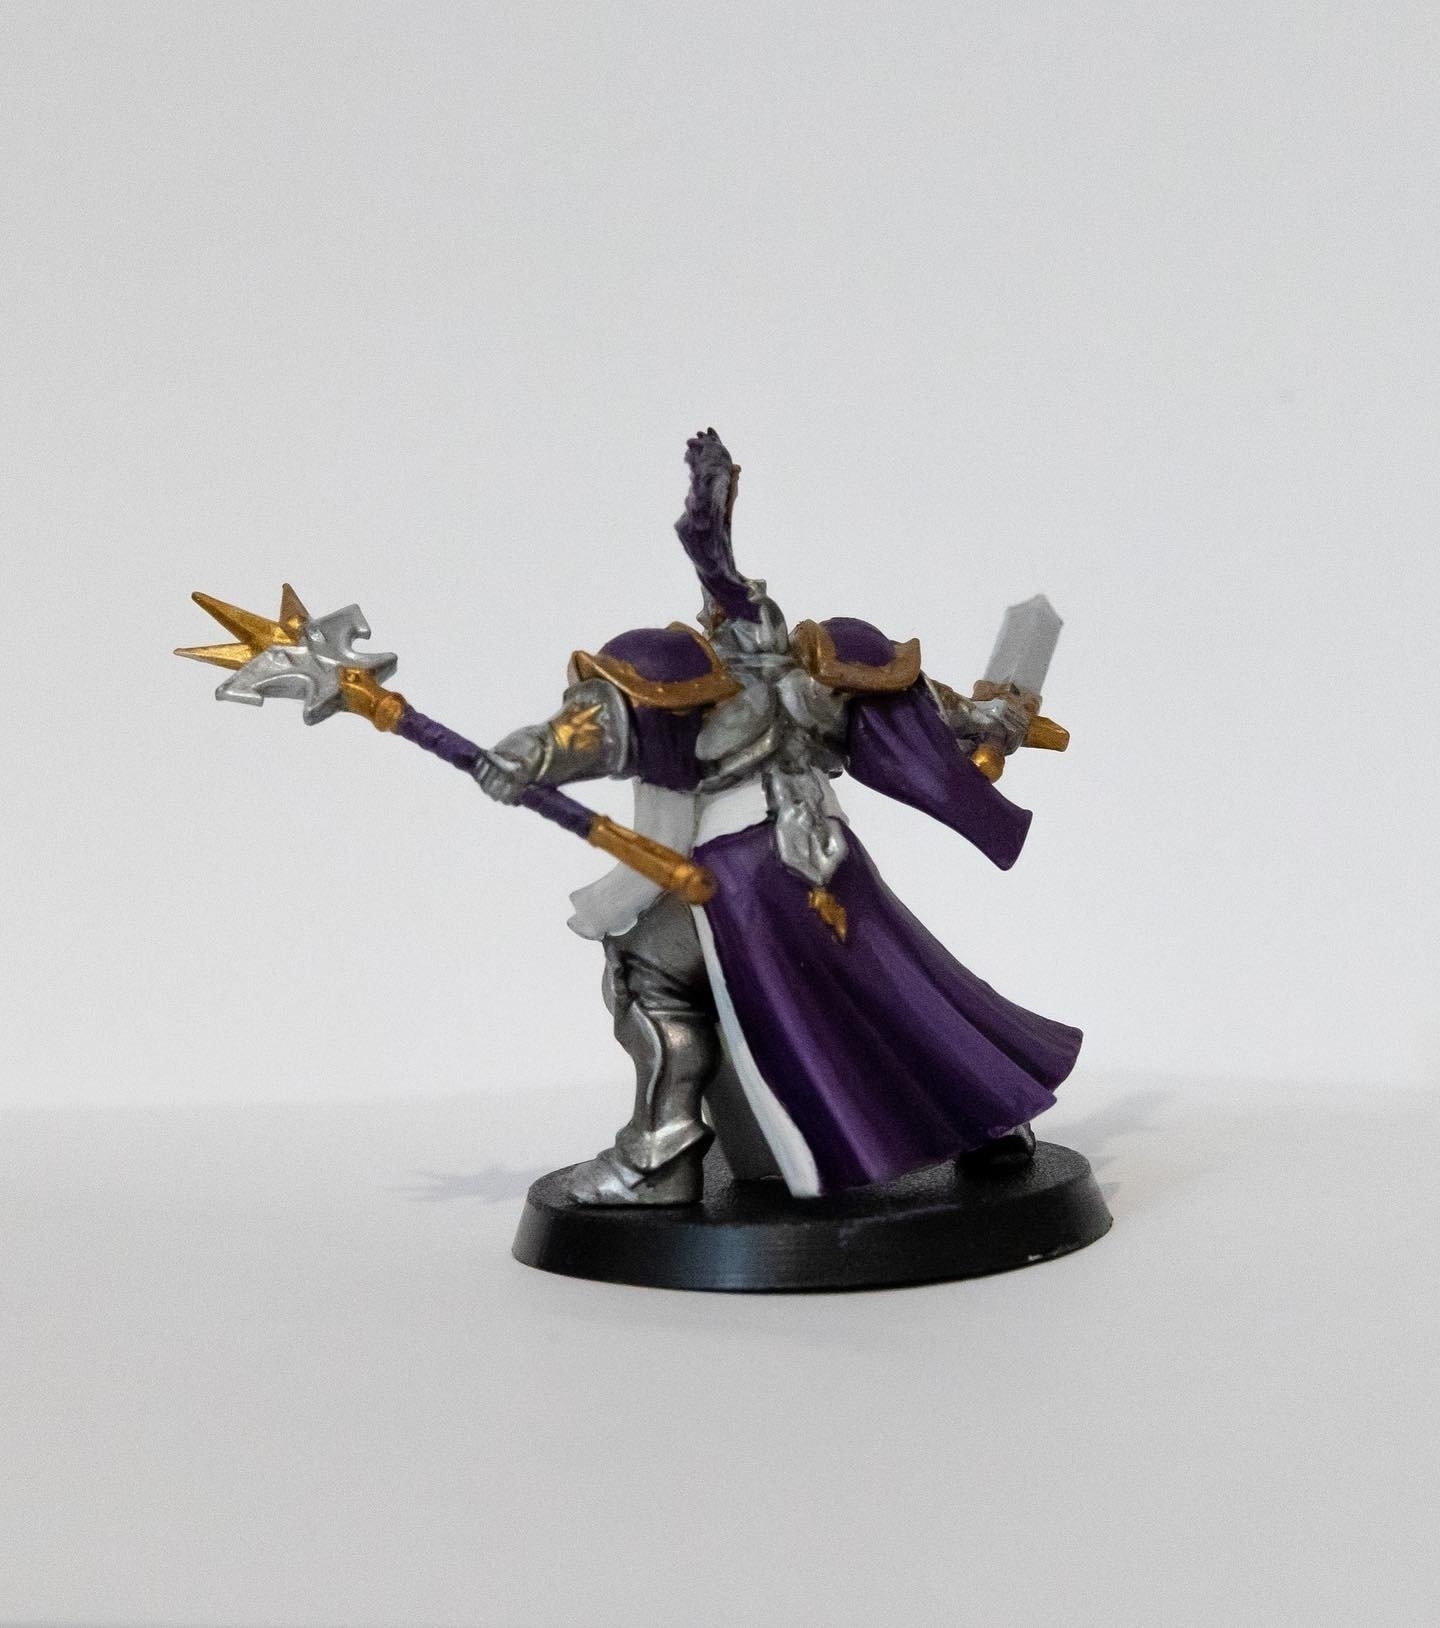 Picture of Stormcast Eternal model in silver with white and purple robes